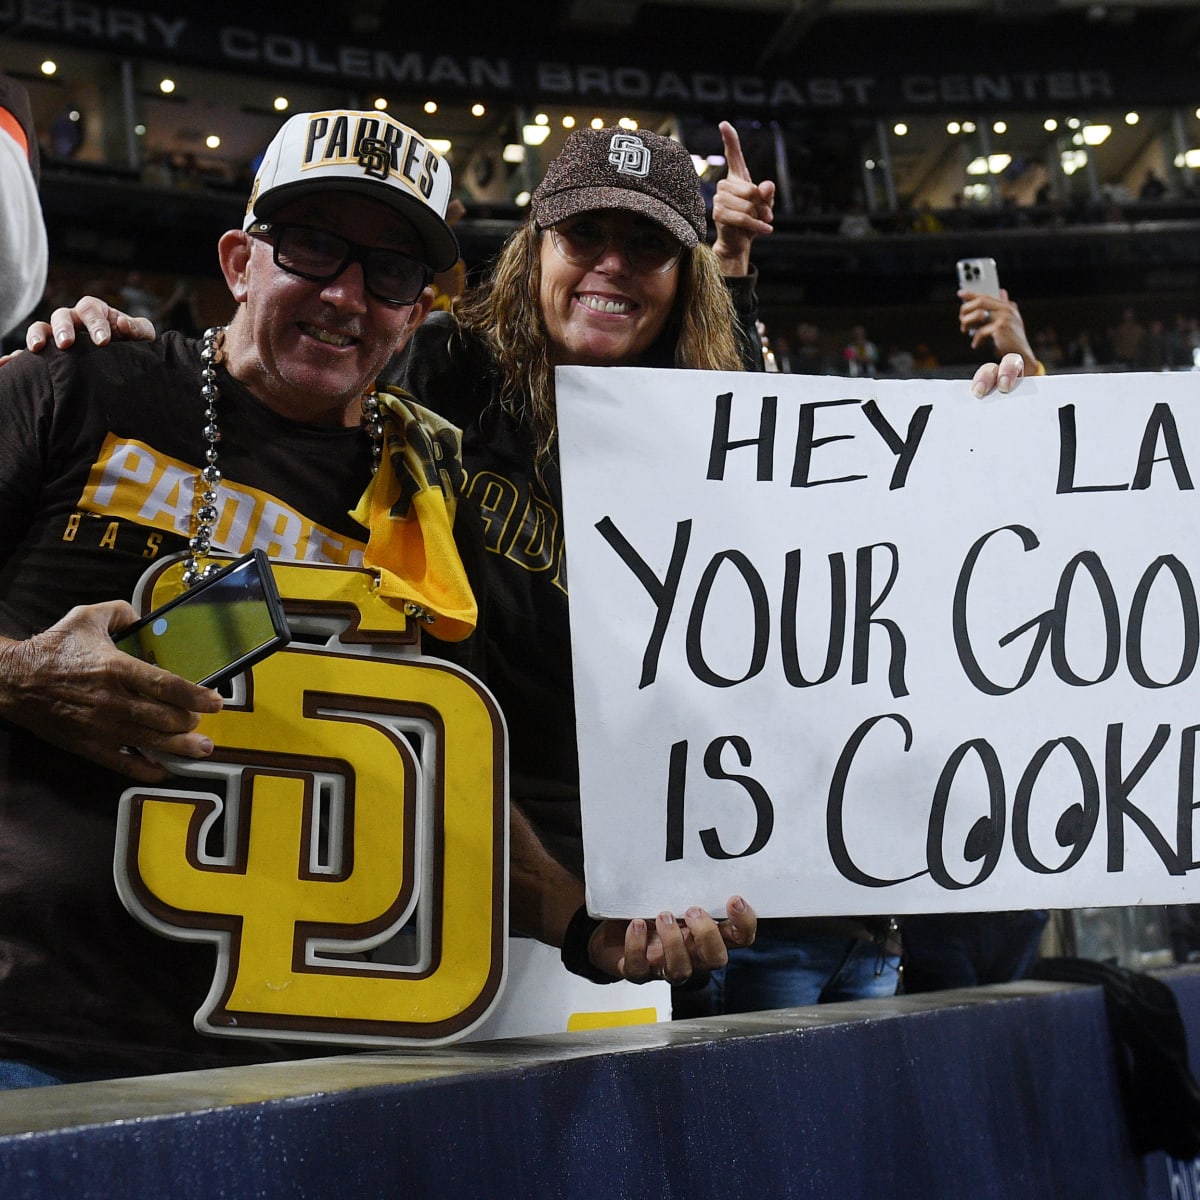 San Diego Padres Fans React to NLCS Loss to Philadelphia Phillies